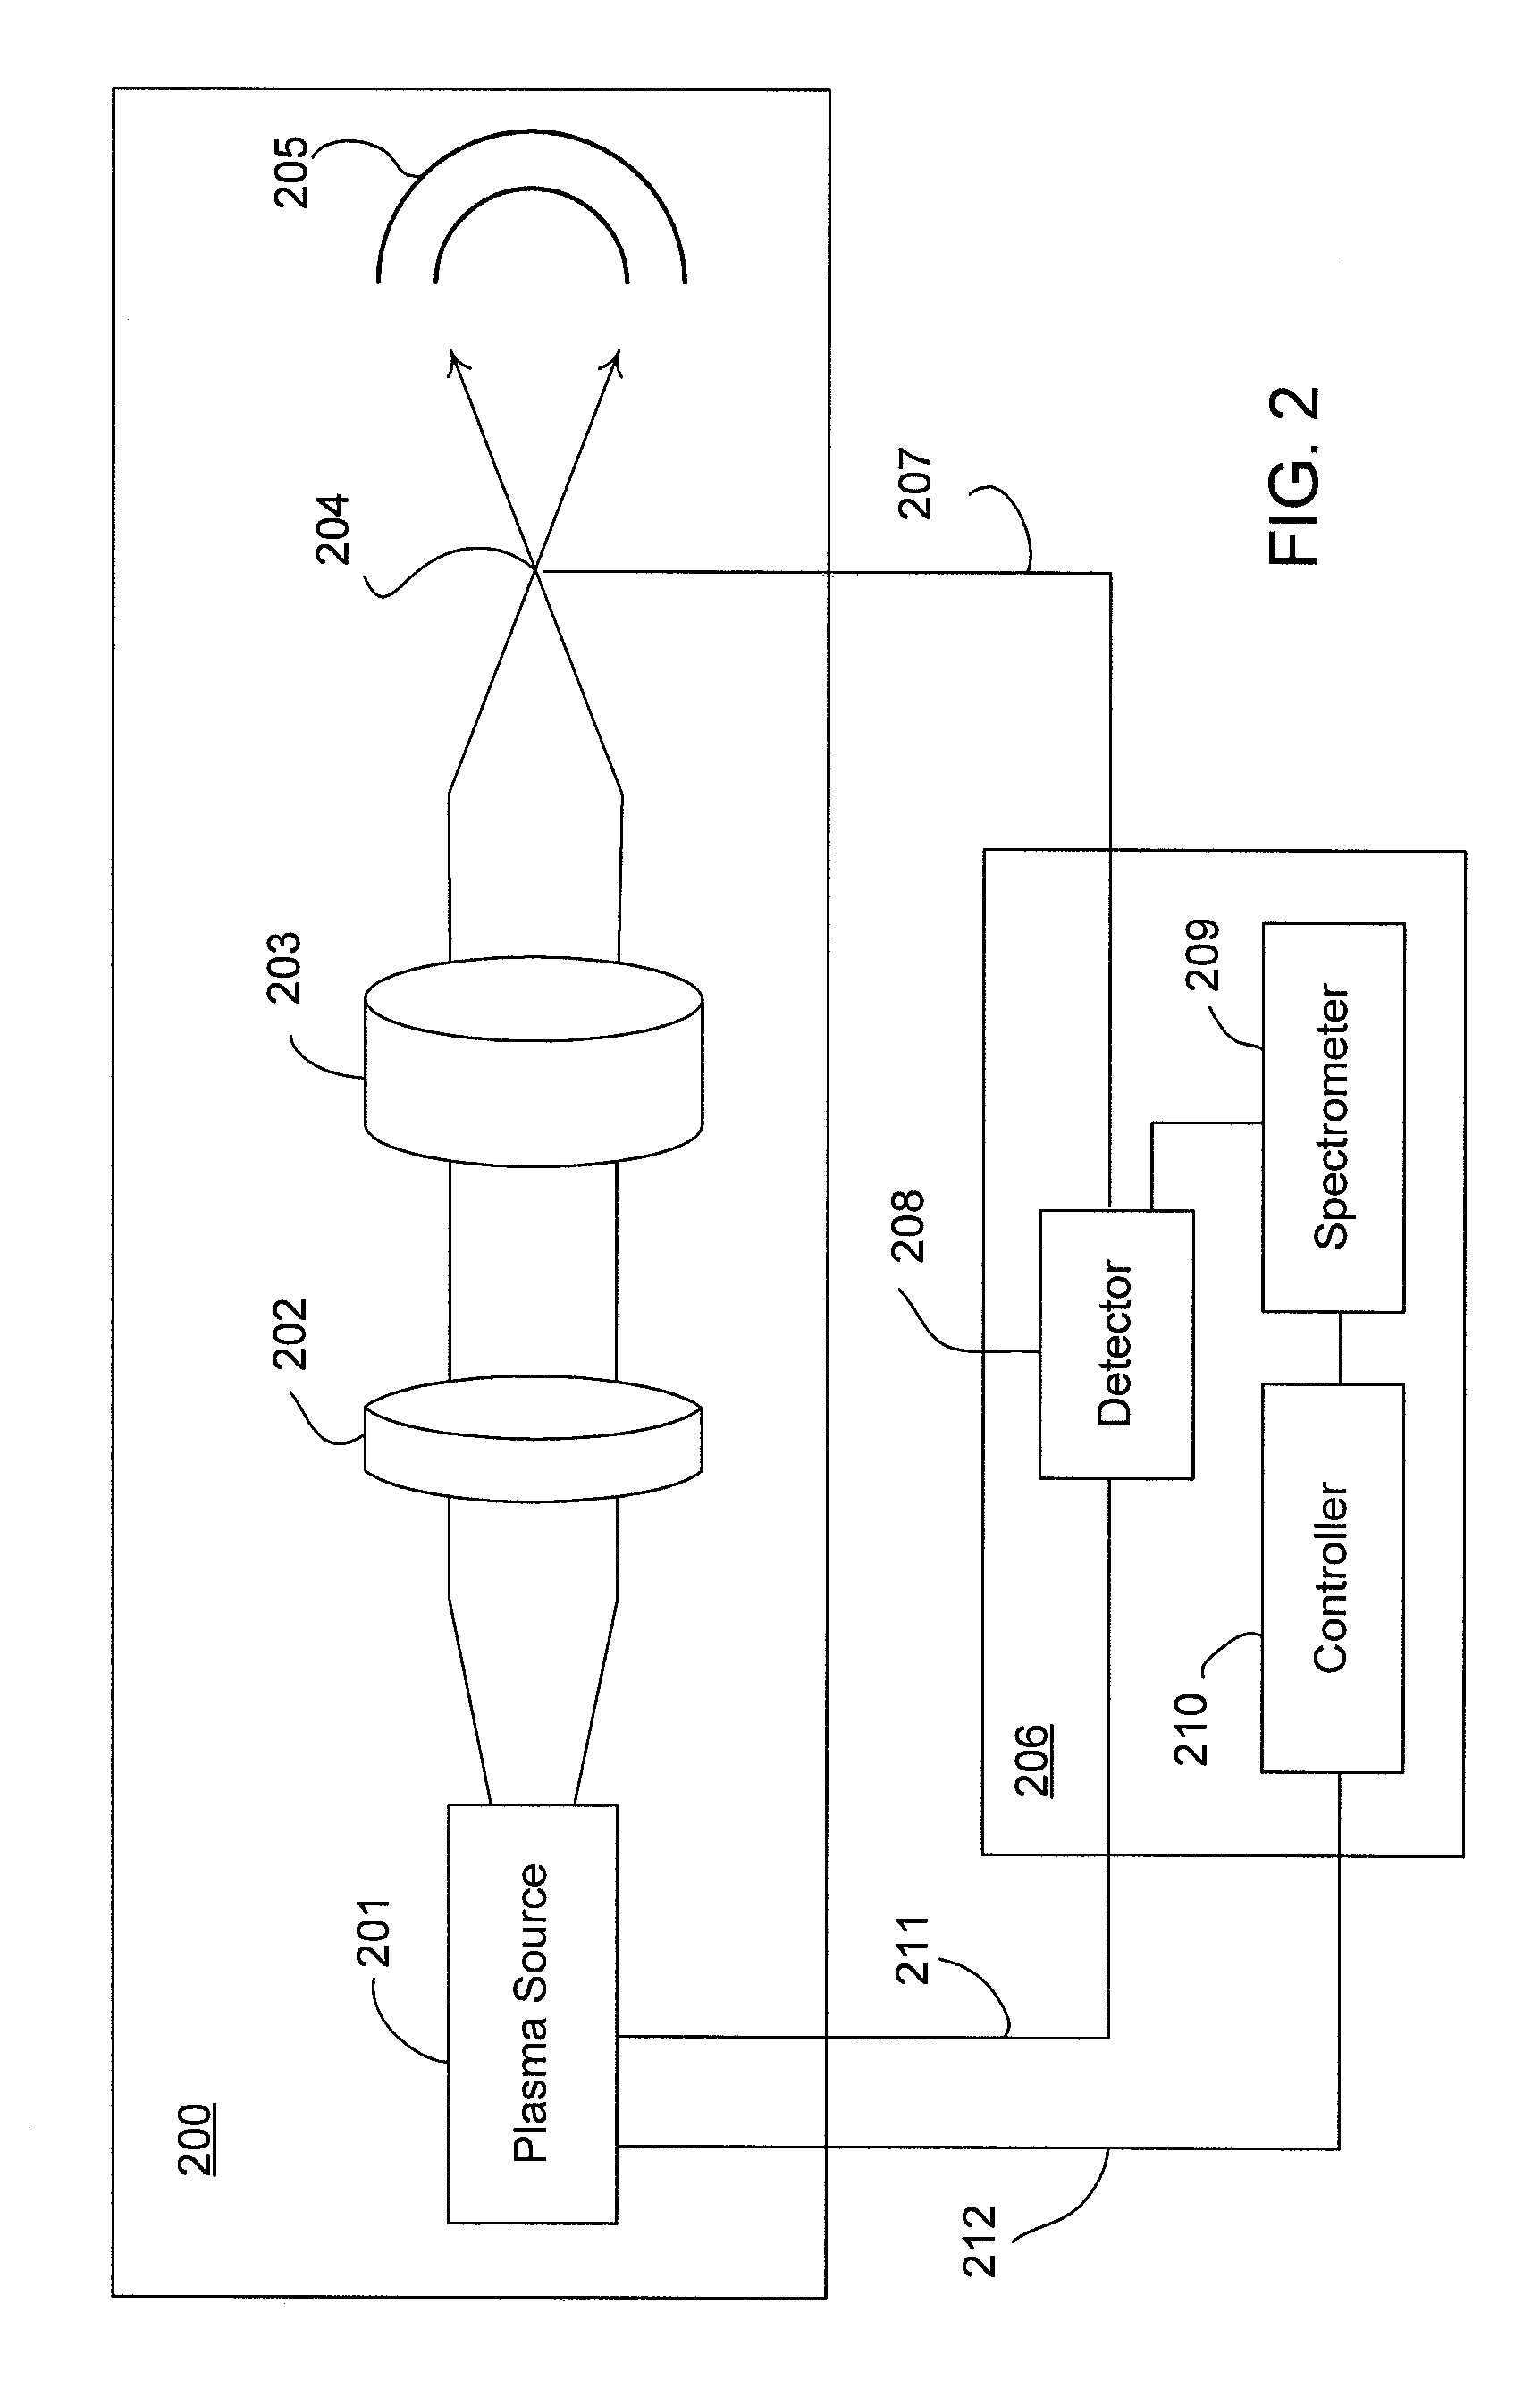 Systems and Methods for Monitoring and Controlling the Operation of Extreme Ultraviolet (EUV) Light Sources Used in Semiconductor Fabrication